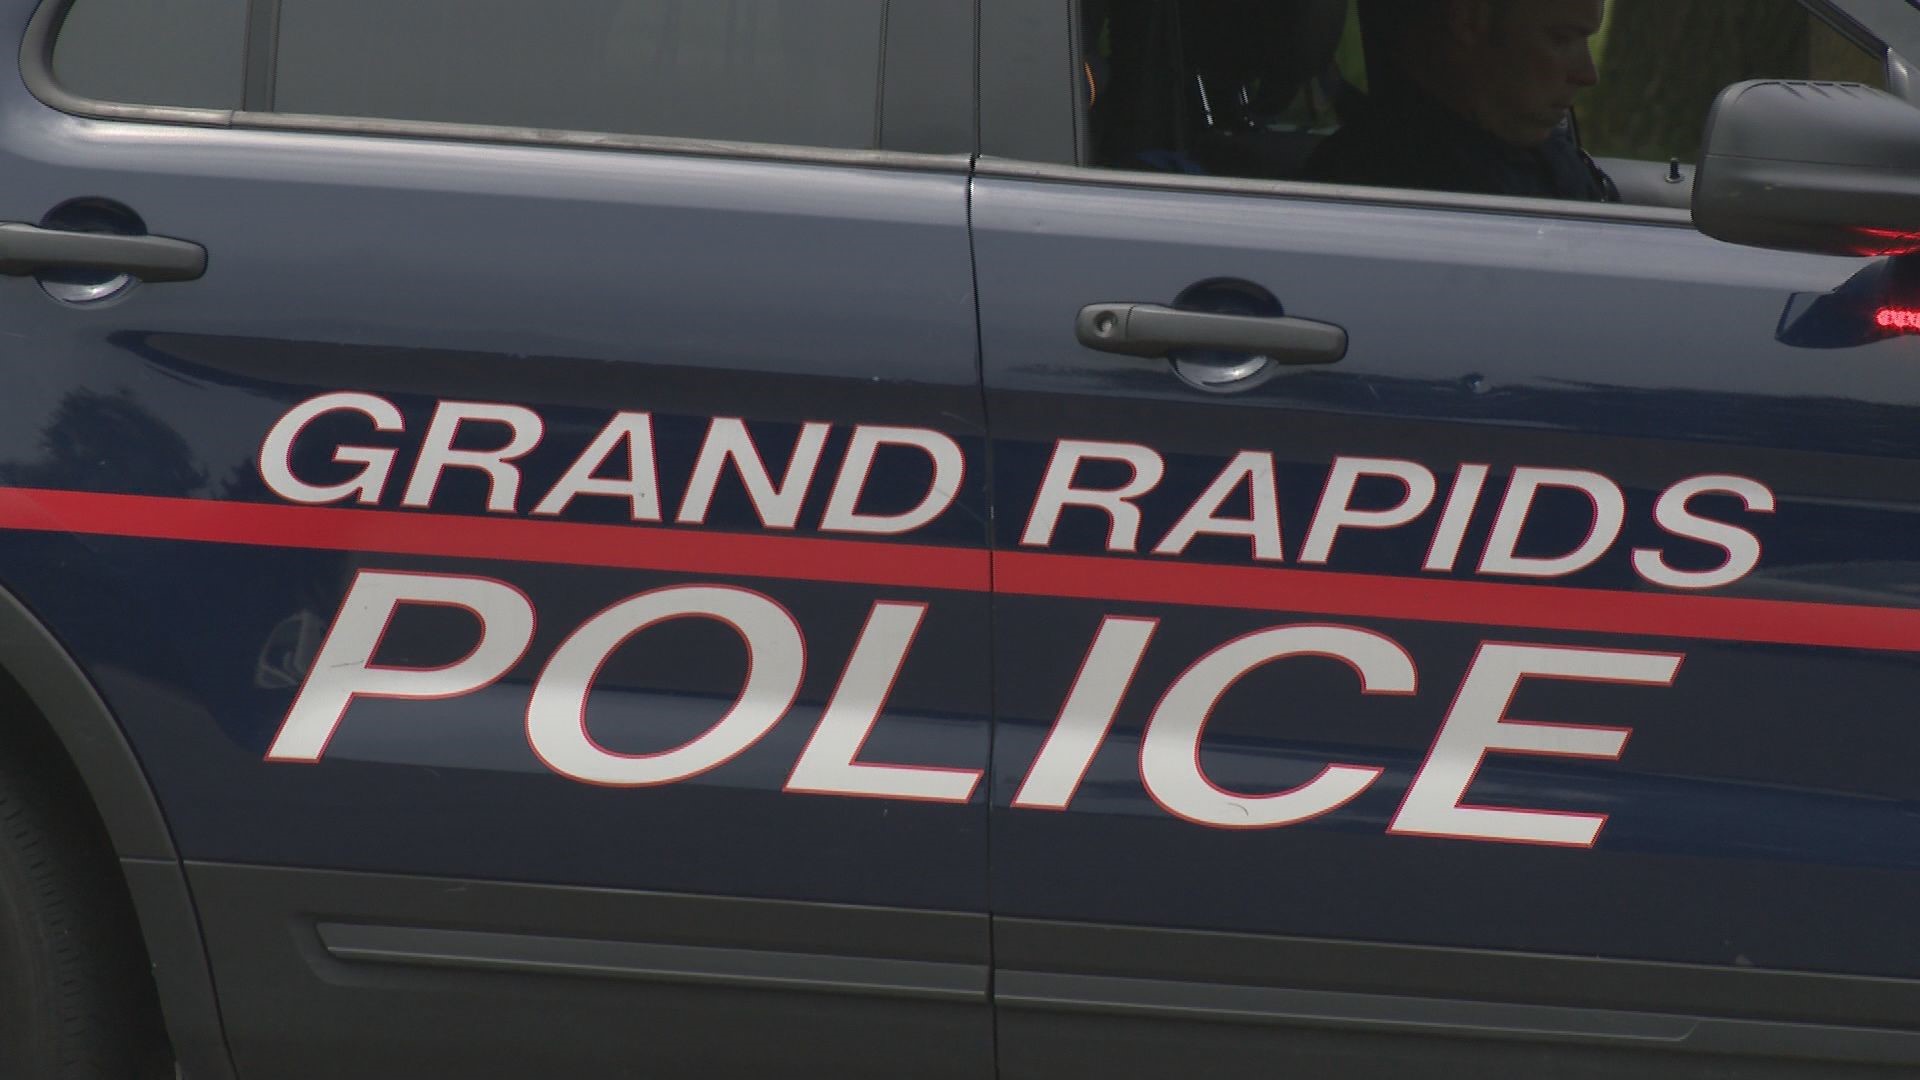 GRPD said door-to-door scams often include bogus contractor repairs, home inspections, security systems and pest or yard services.